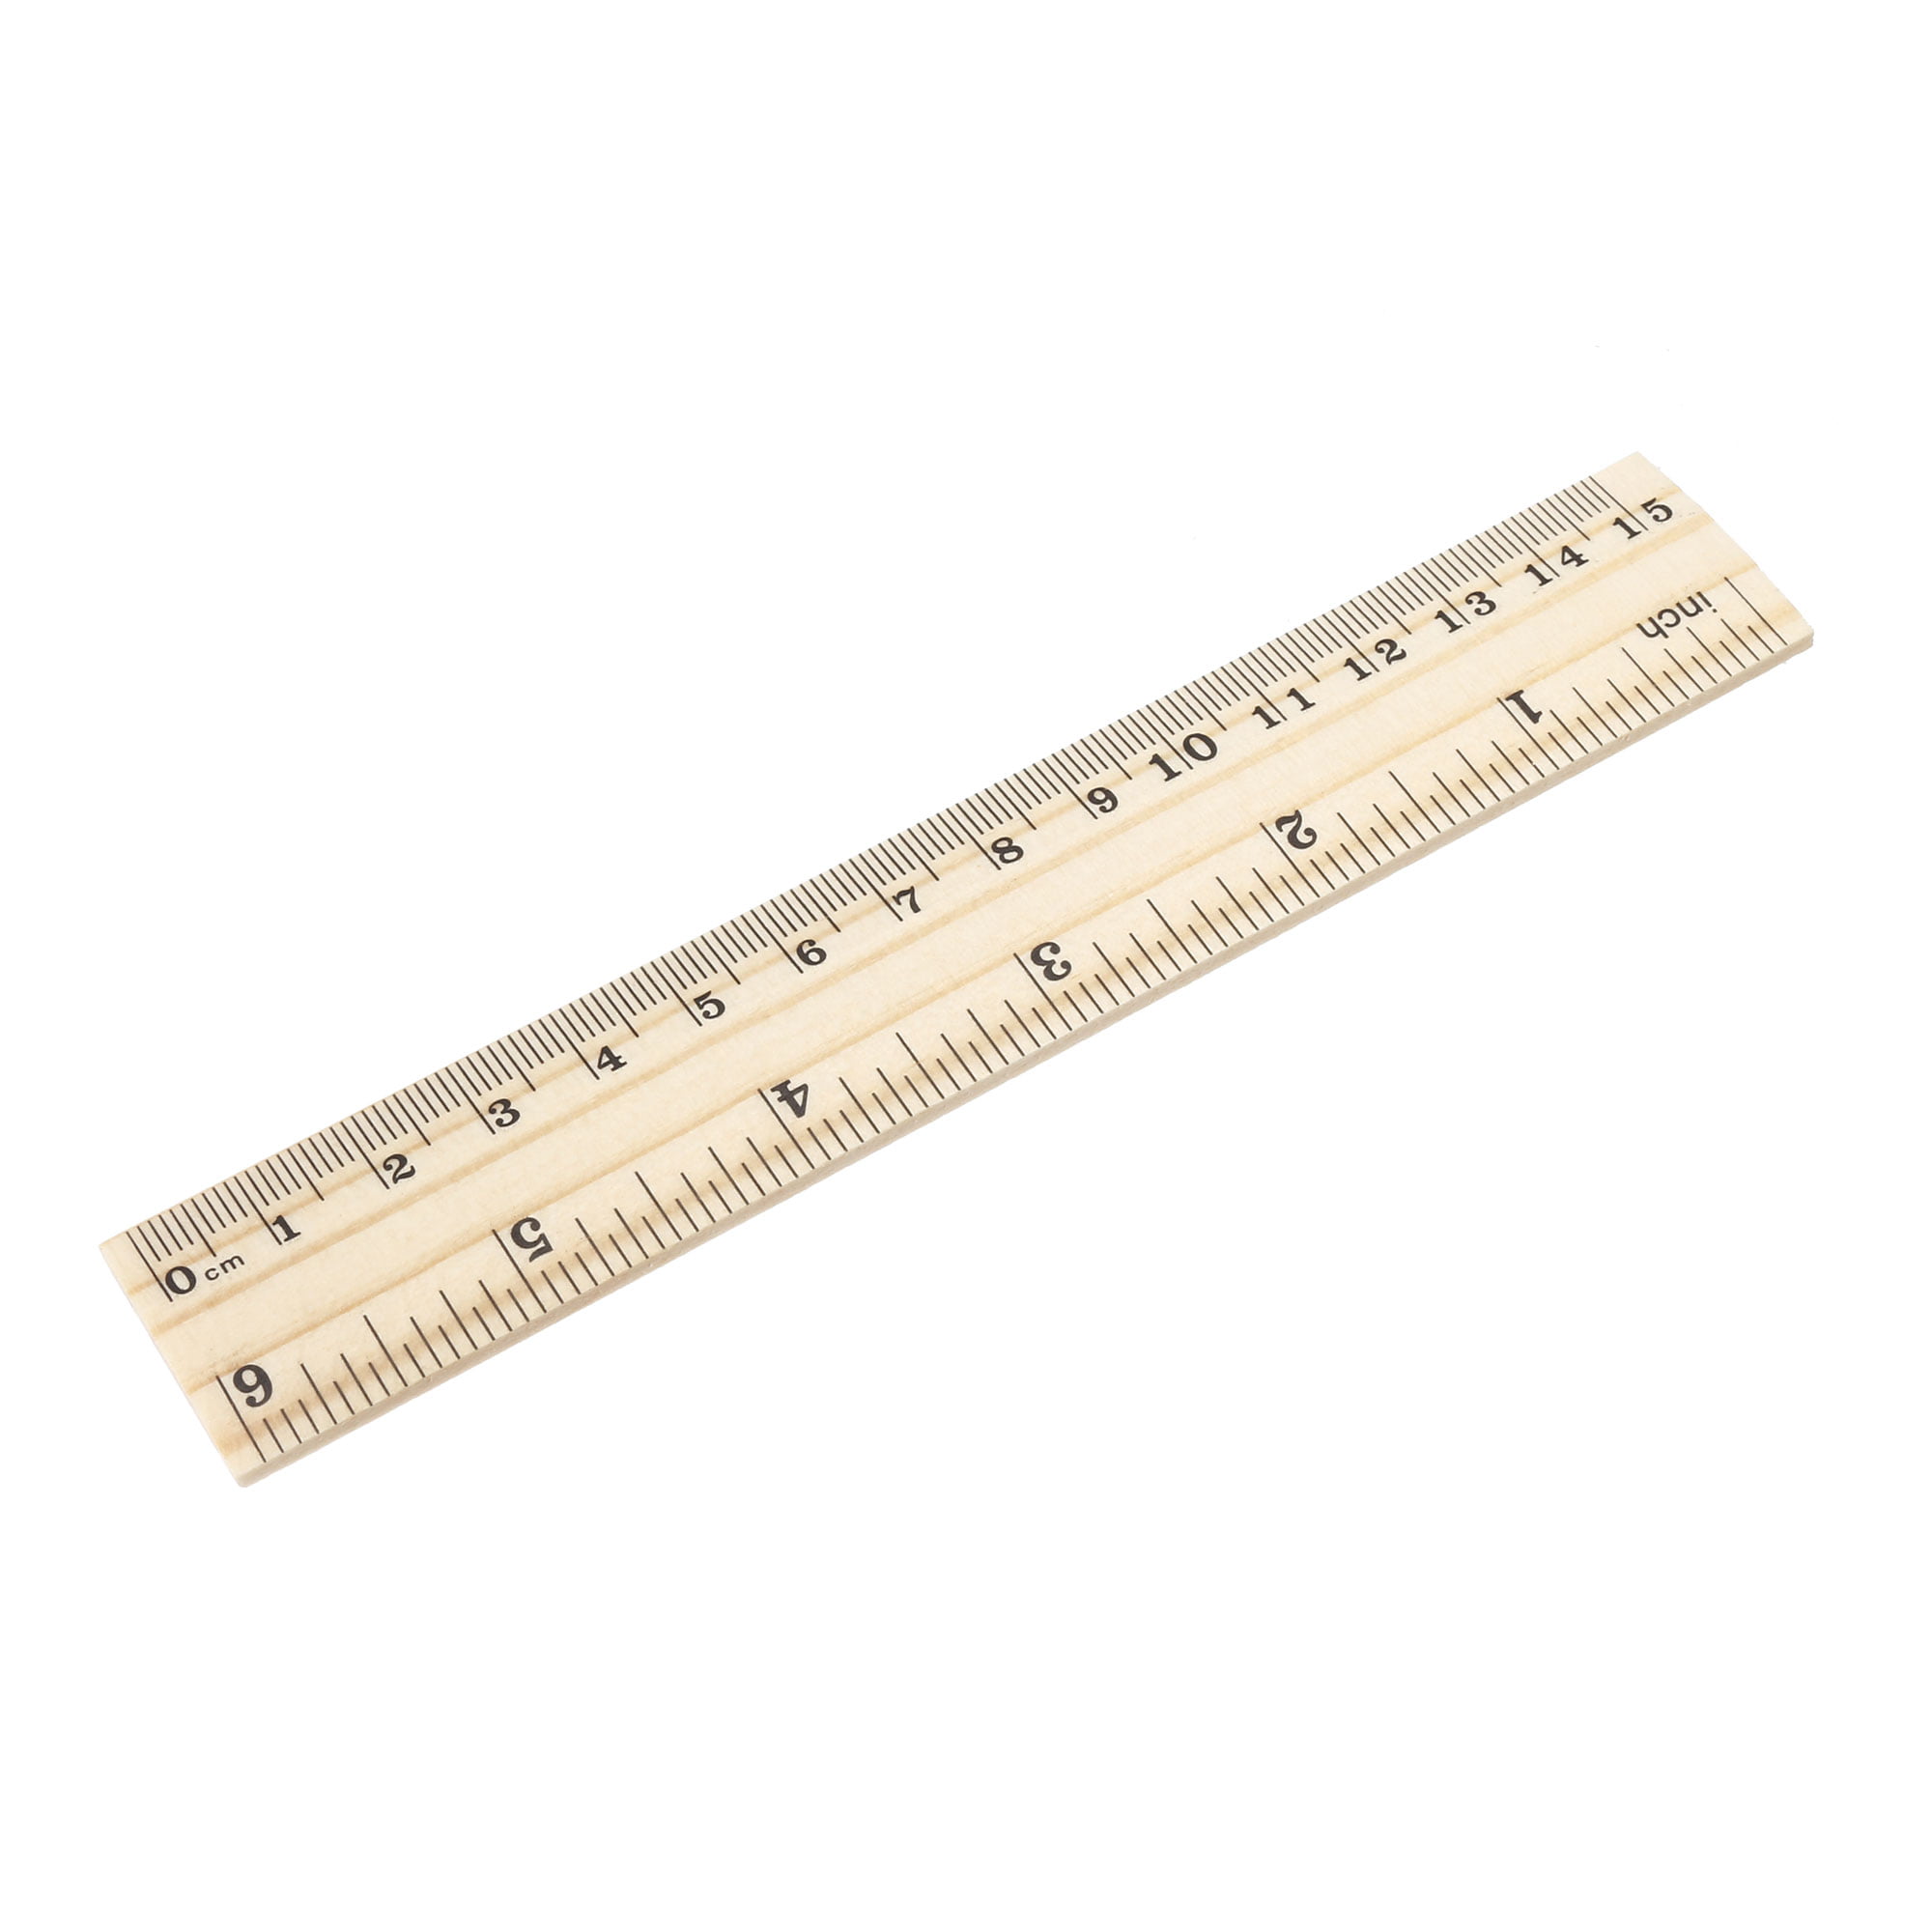 ruler in inches